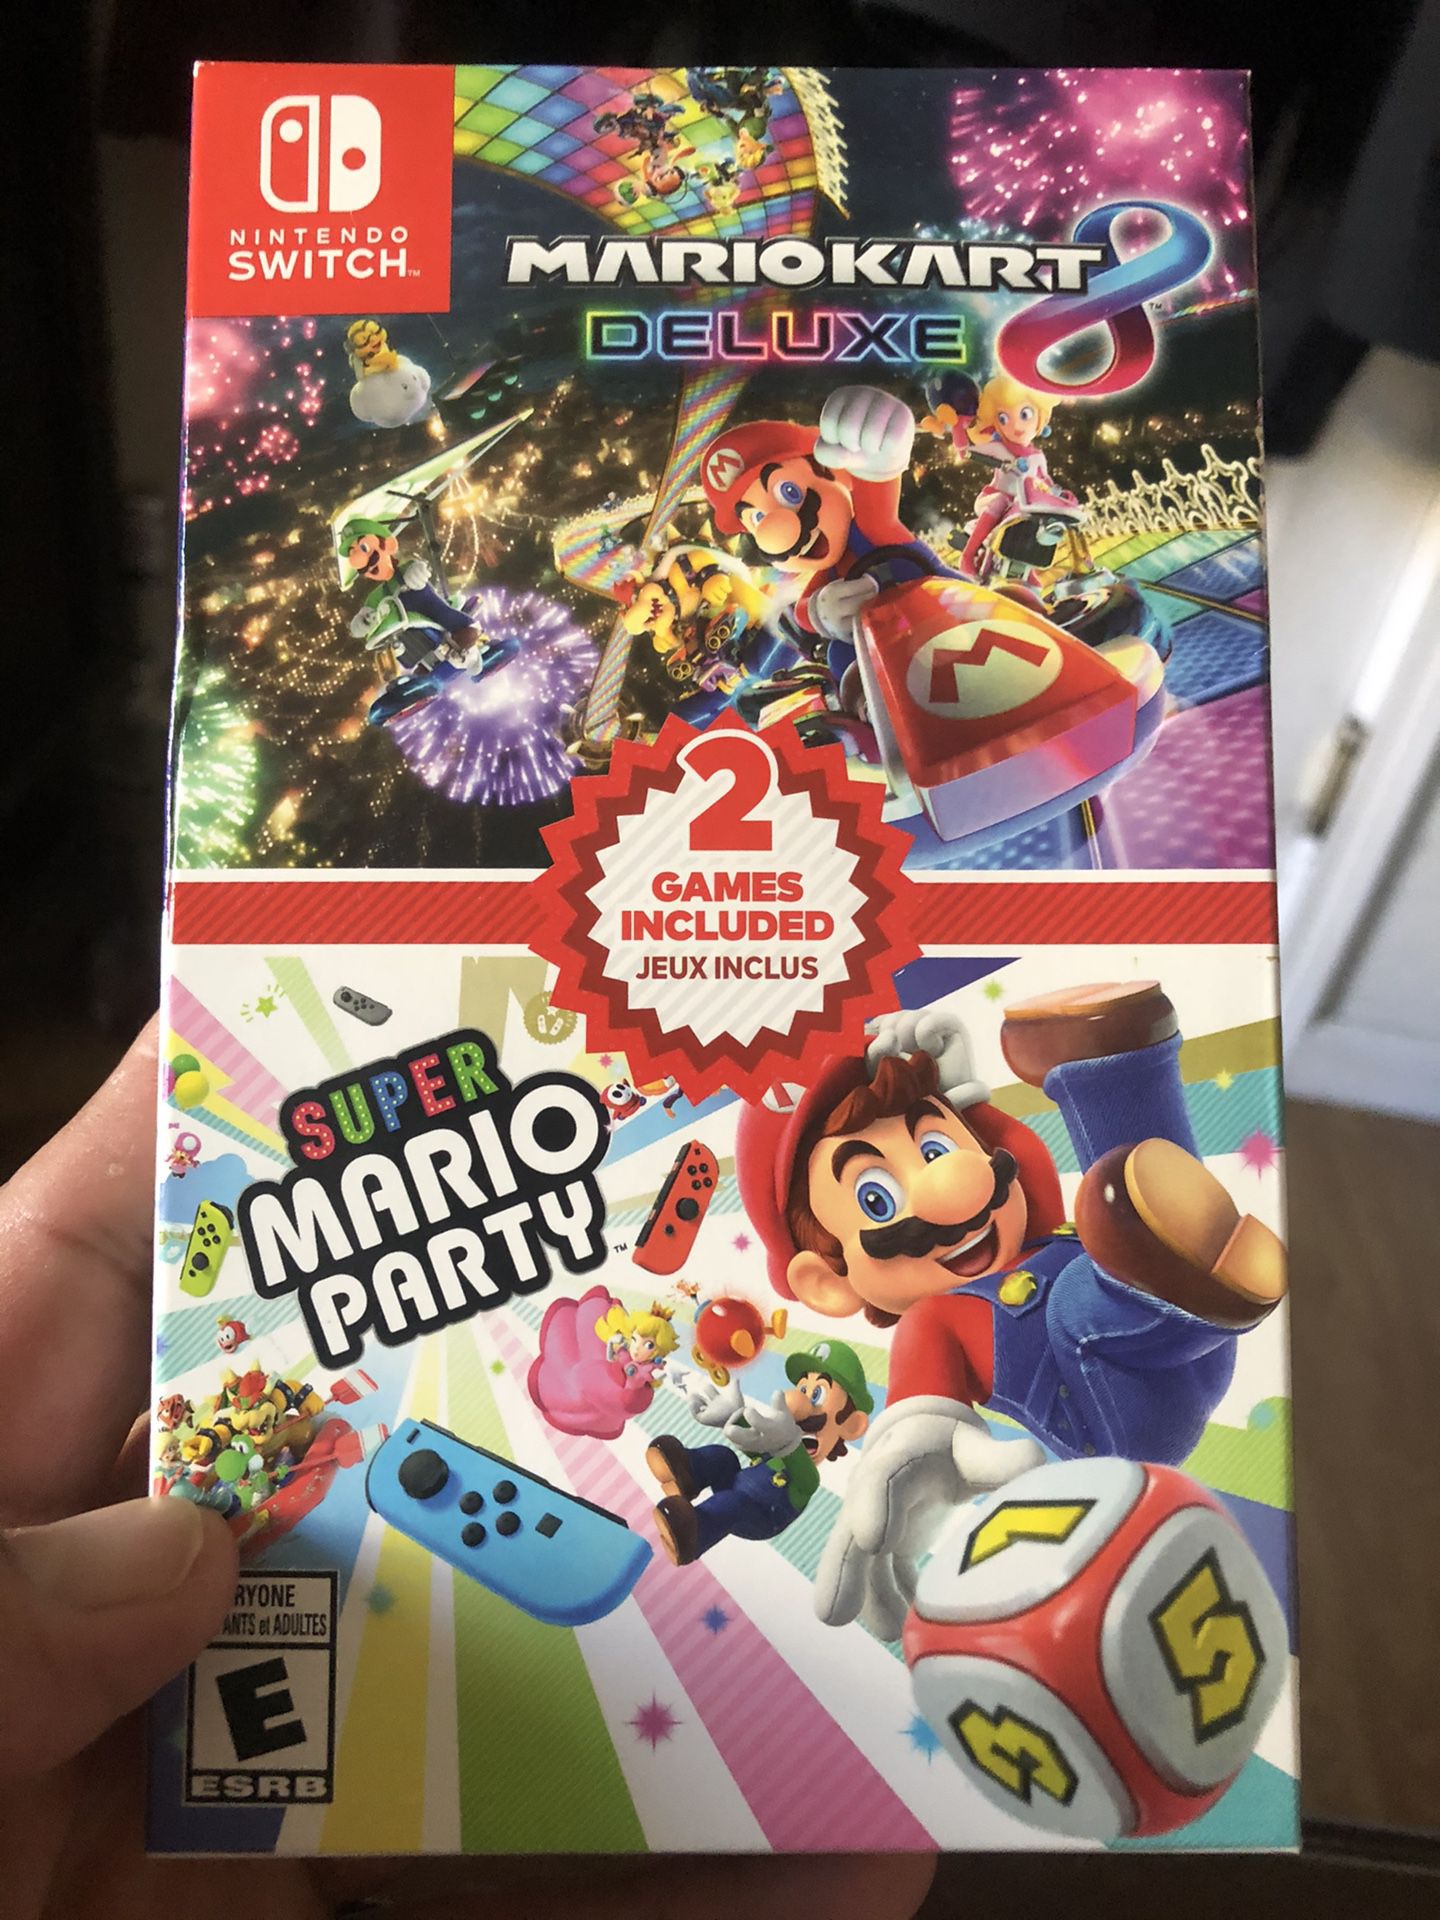 Mario Kart & Super Mario Party combo pack 100$$$ brand new sealed